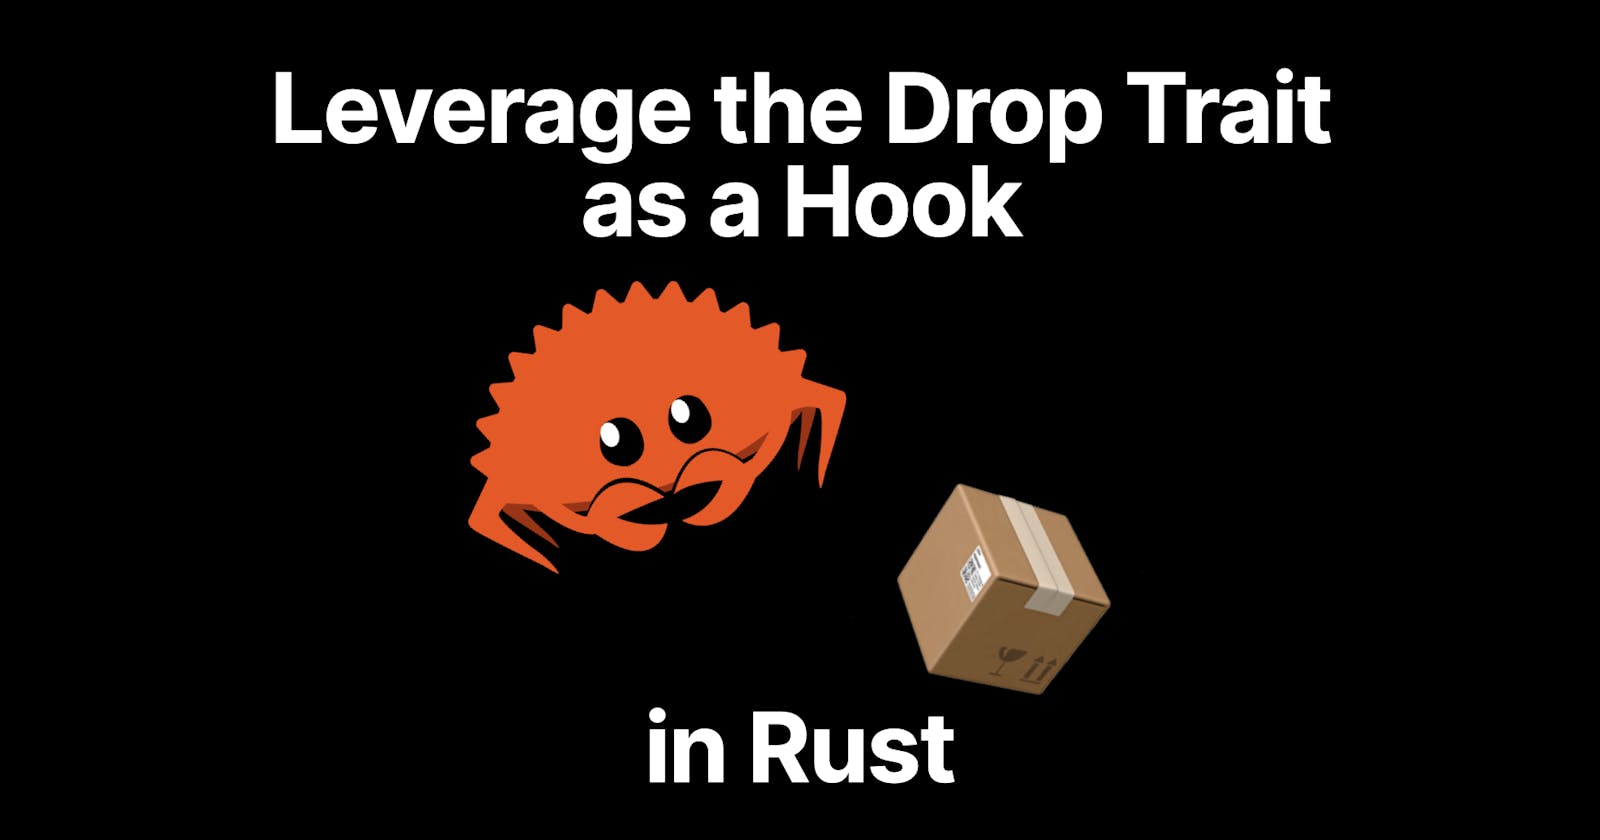 Leverage the Drop Trait as a Hook in Rust